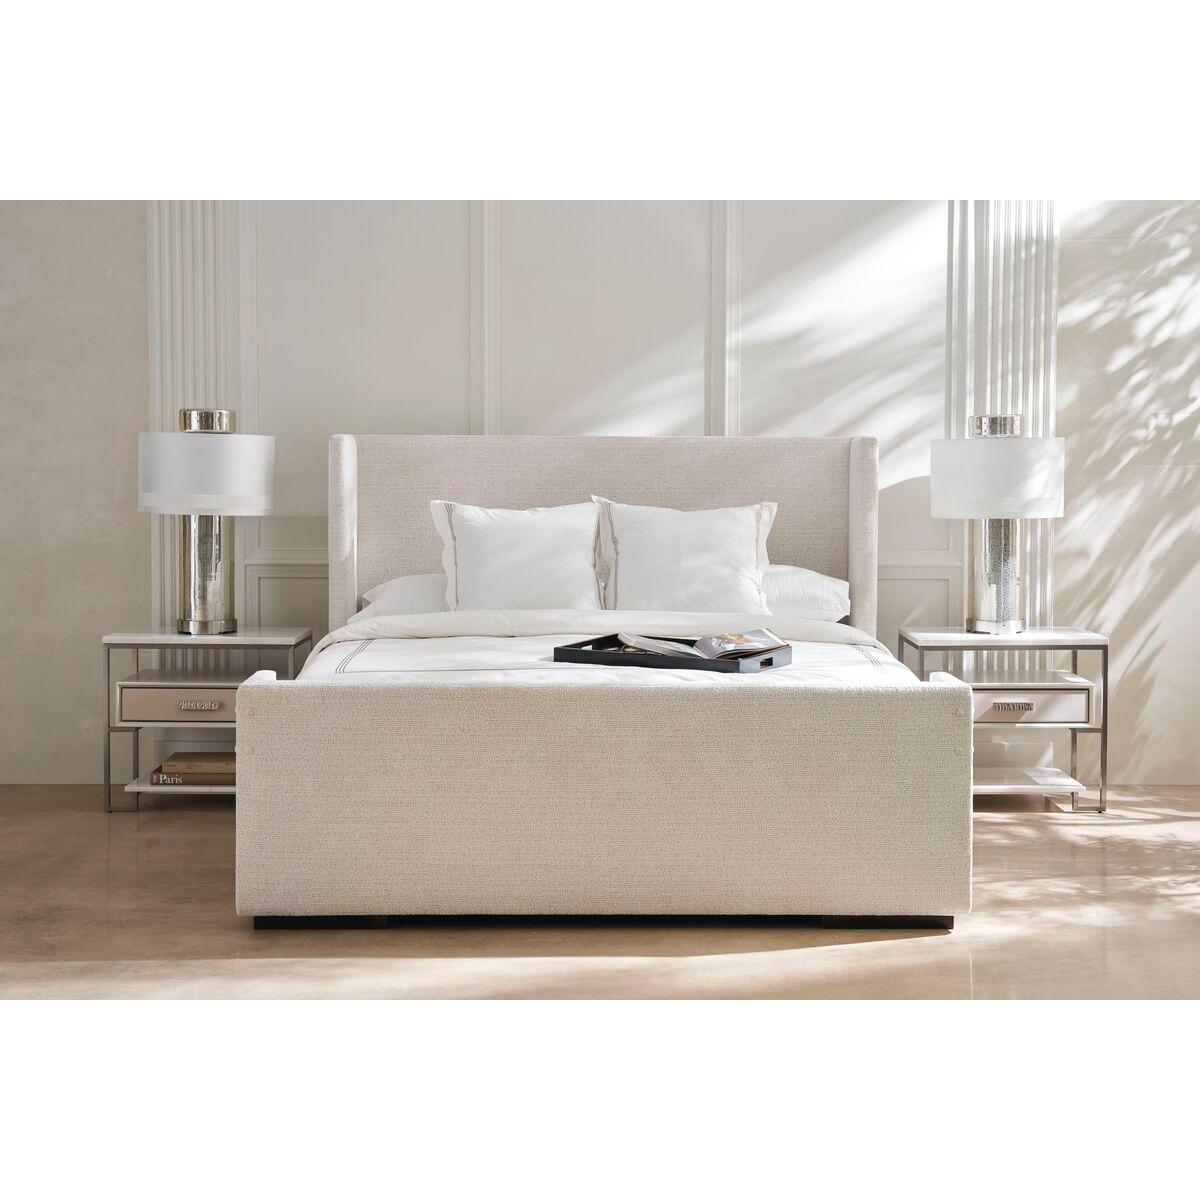 Fabric Upholstered King Size Minimalist Bed For Sale